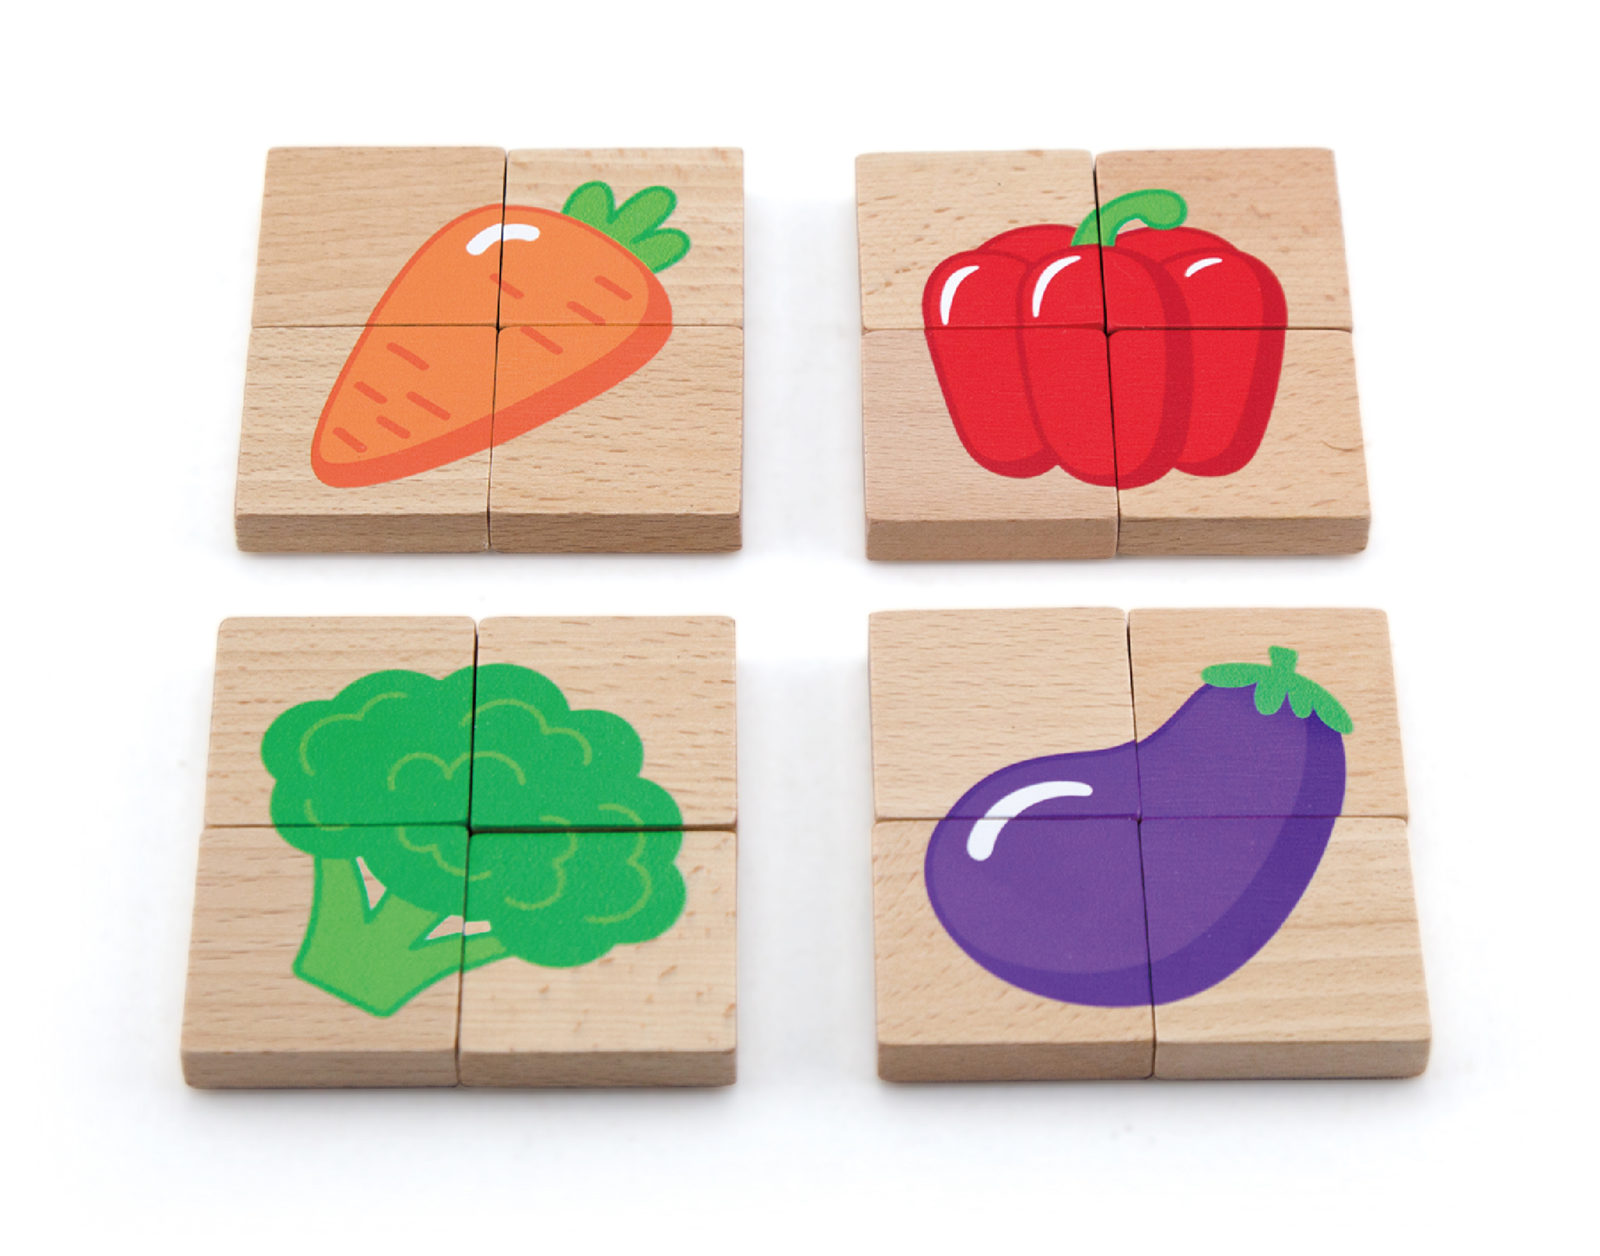 magnetic wooden puzzle tiles showing vegetables